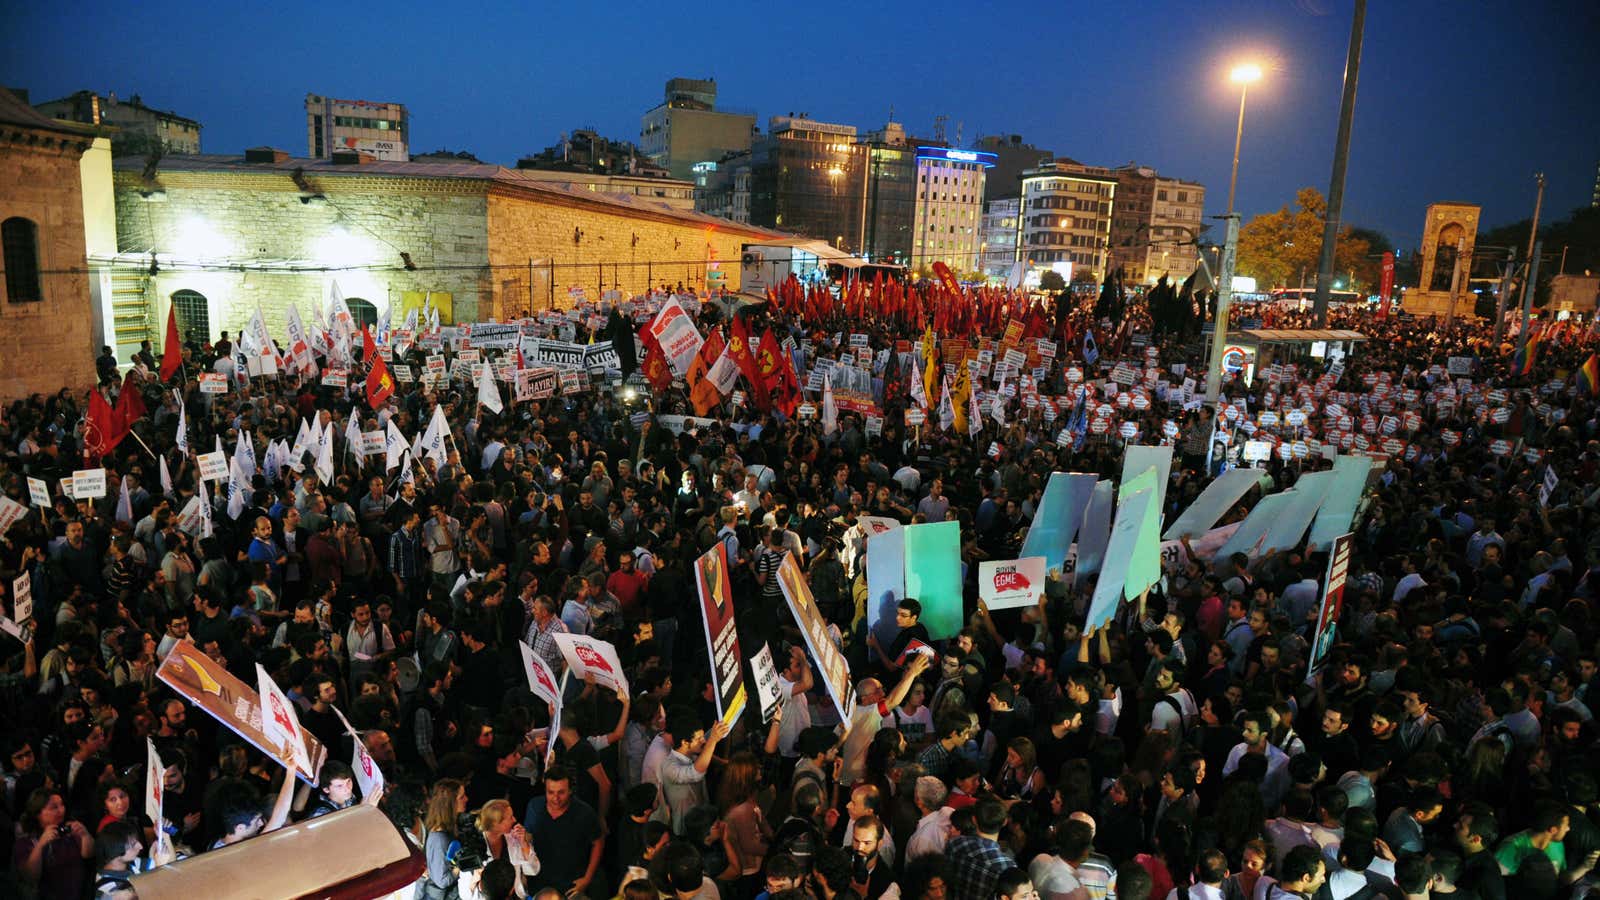 After deadly shelling on the Syria-Turkey border, protesters demonstrate against war.